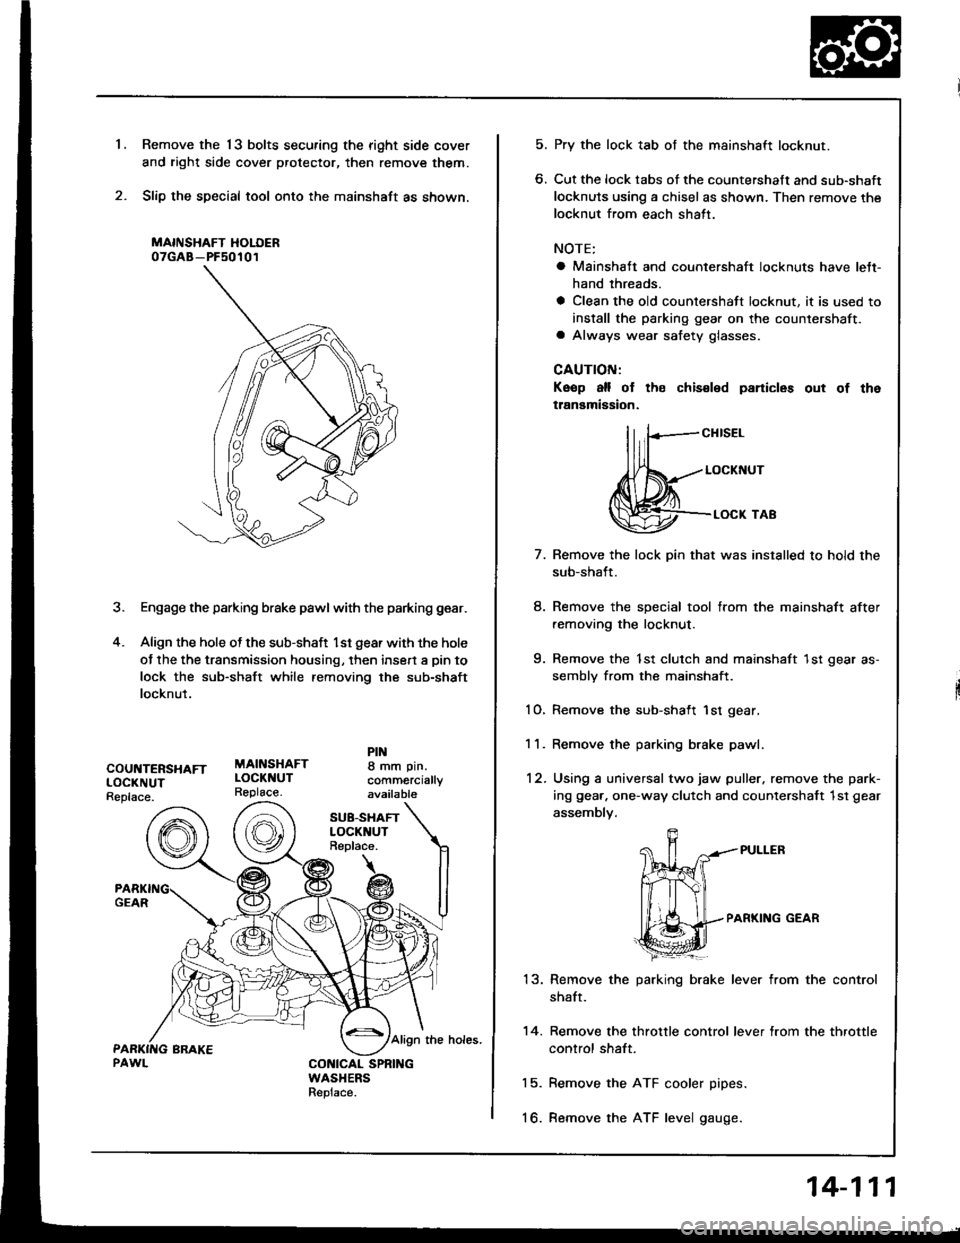 ACURA INTEGRA 1994  Service Owners Manual Remove the 13 bolts securing the right side cover
and right side cover protector, then remove them.
Slip the special tool onto the mainshaft as shown.
MAINSHAFT HOLOER07GAB-PF50101
3. Engage the parki